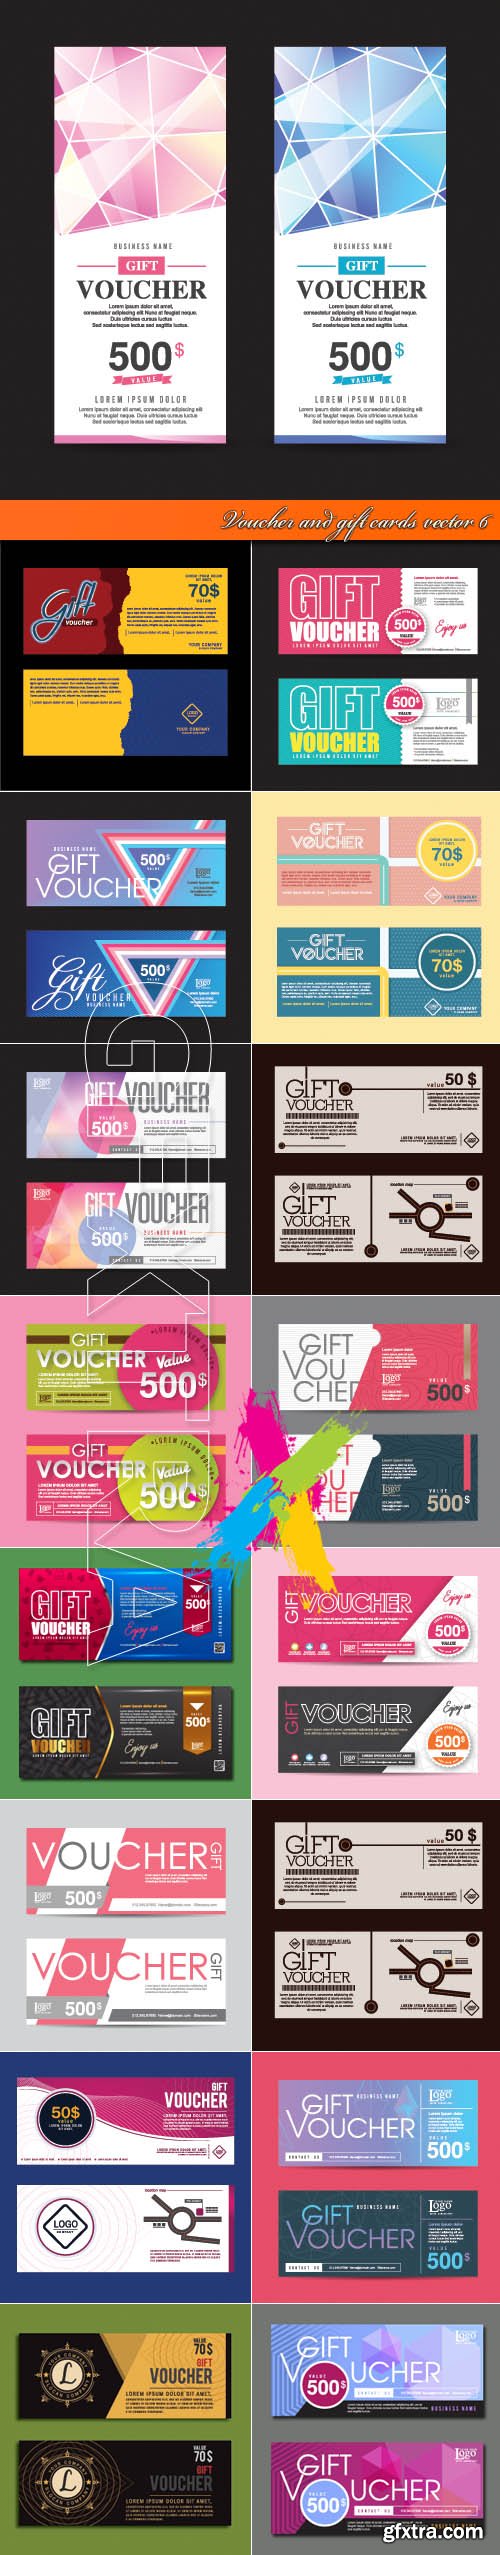 Voucher and gift cards vector 6